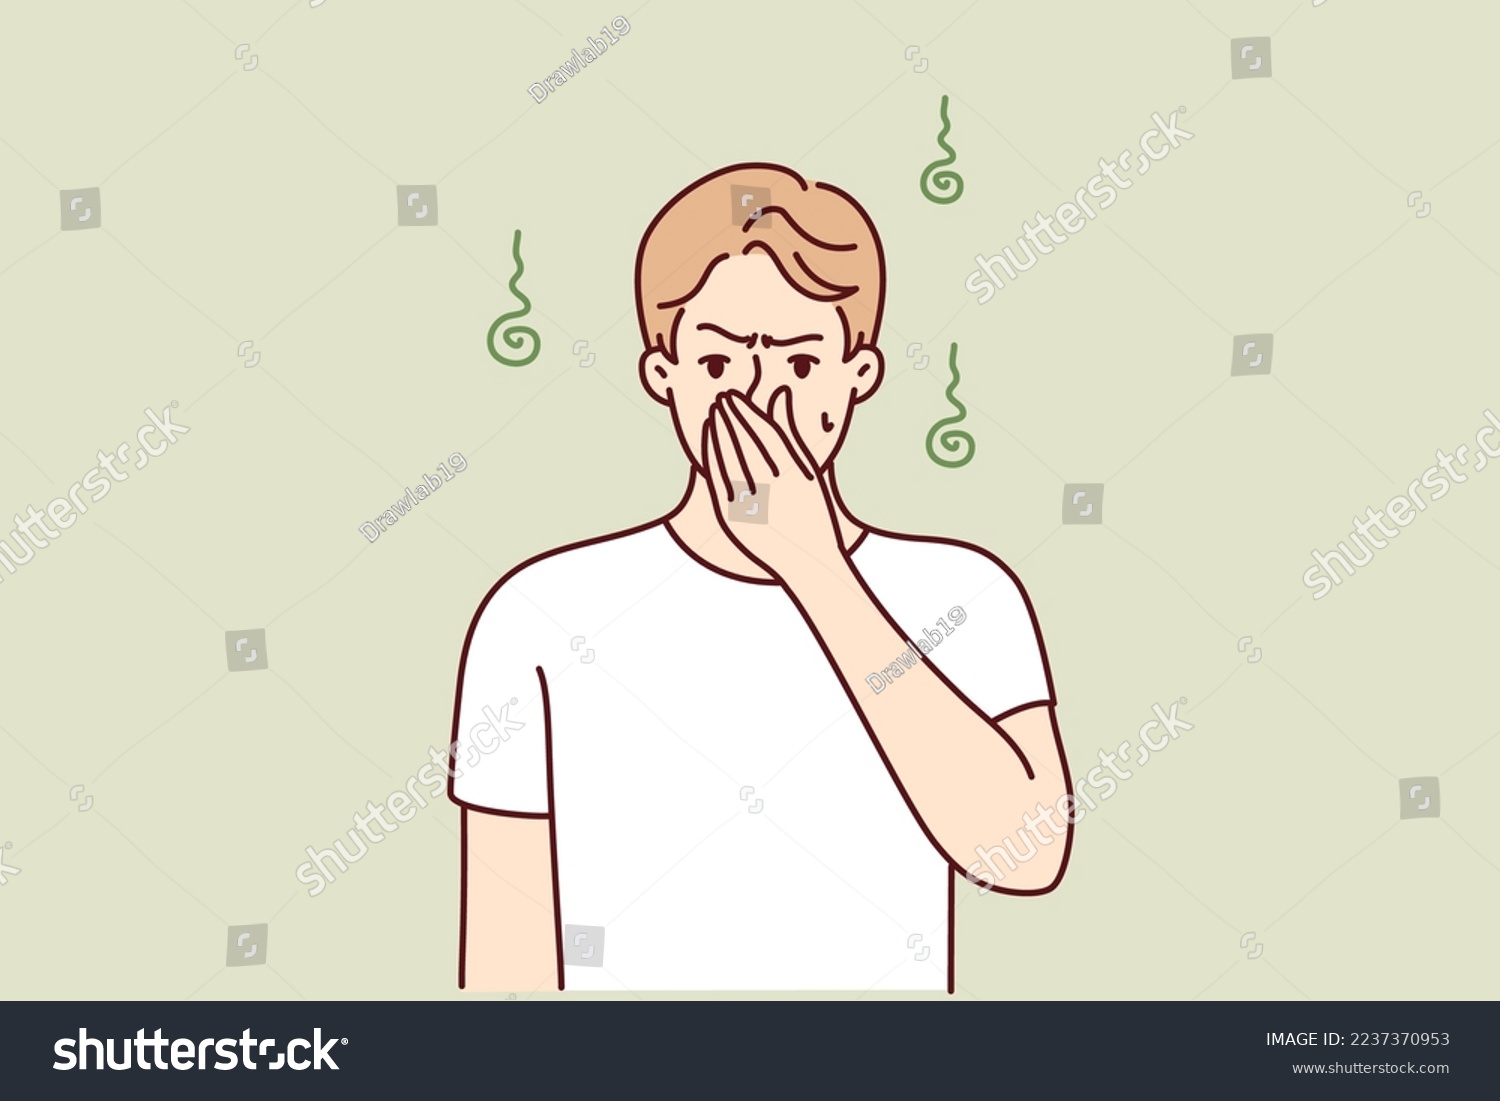 SVG of Dissatisfied man pinching nose with hand while suffering from unpleasant smell sweat. Guy is experiencing discomfort due to non-compliance with hygiene standards or health problems. Flat vector image svg